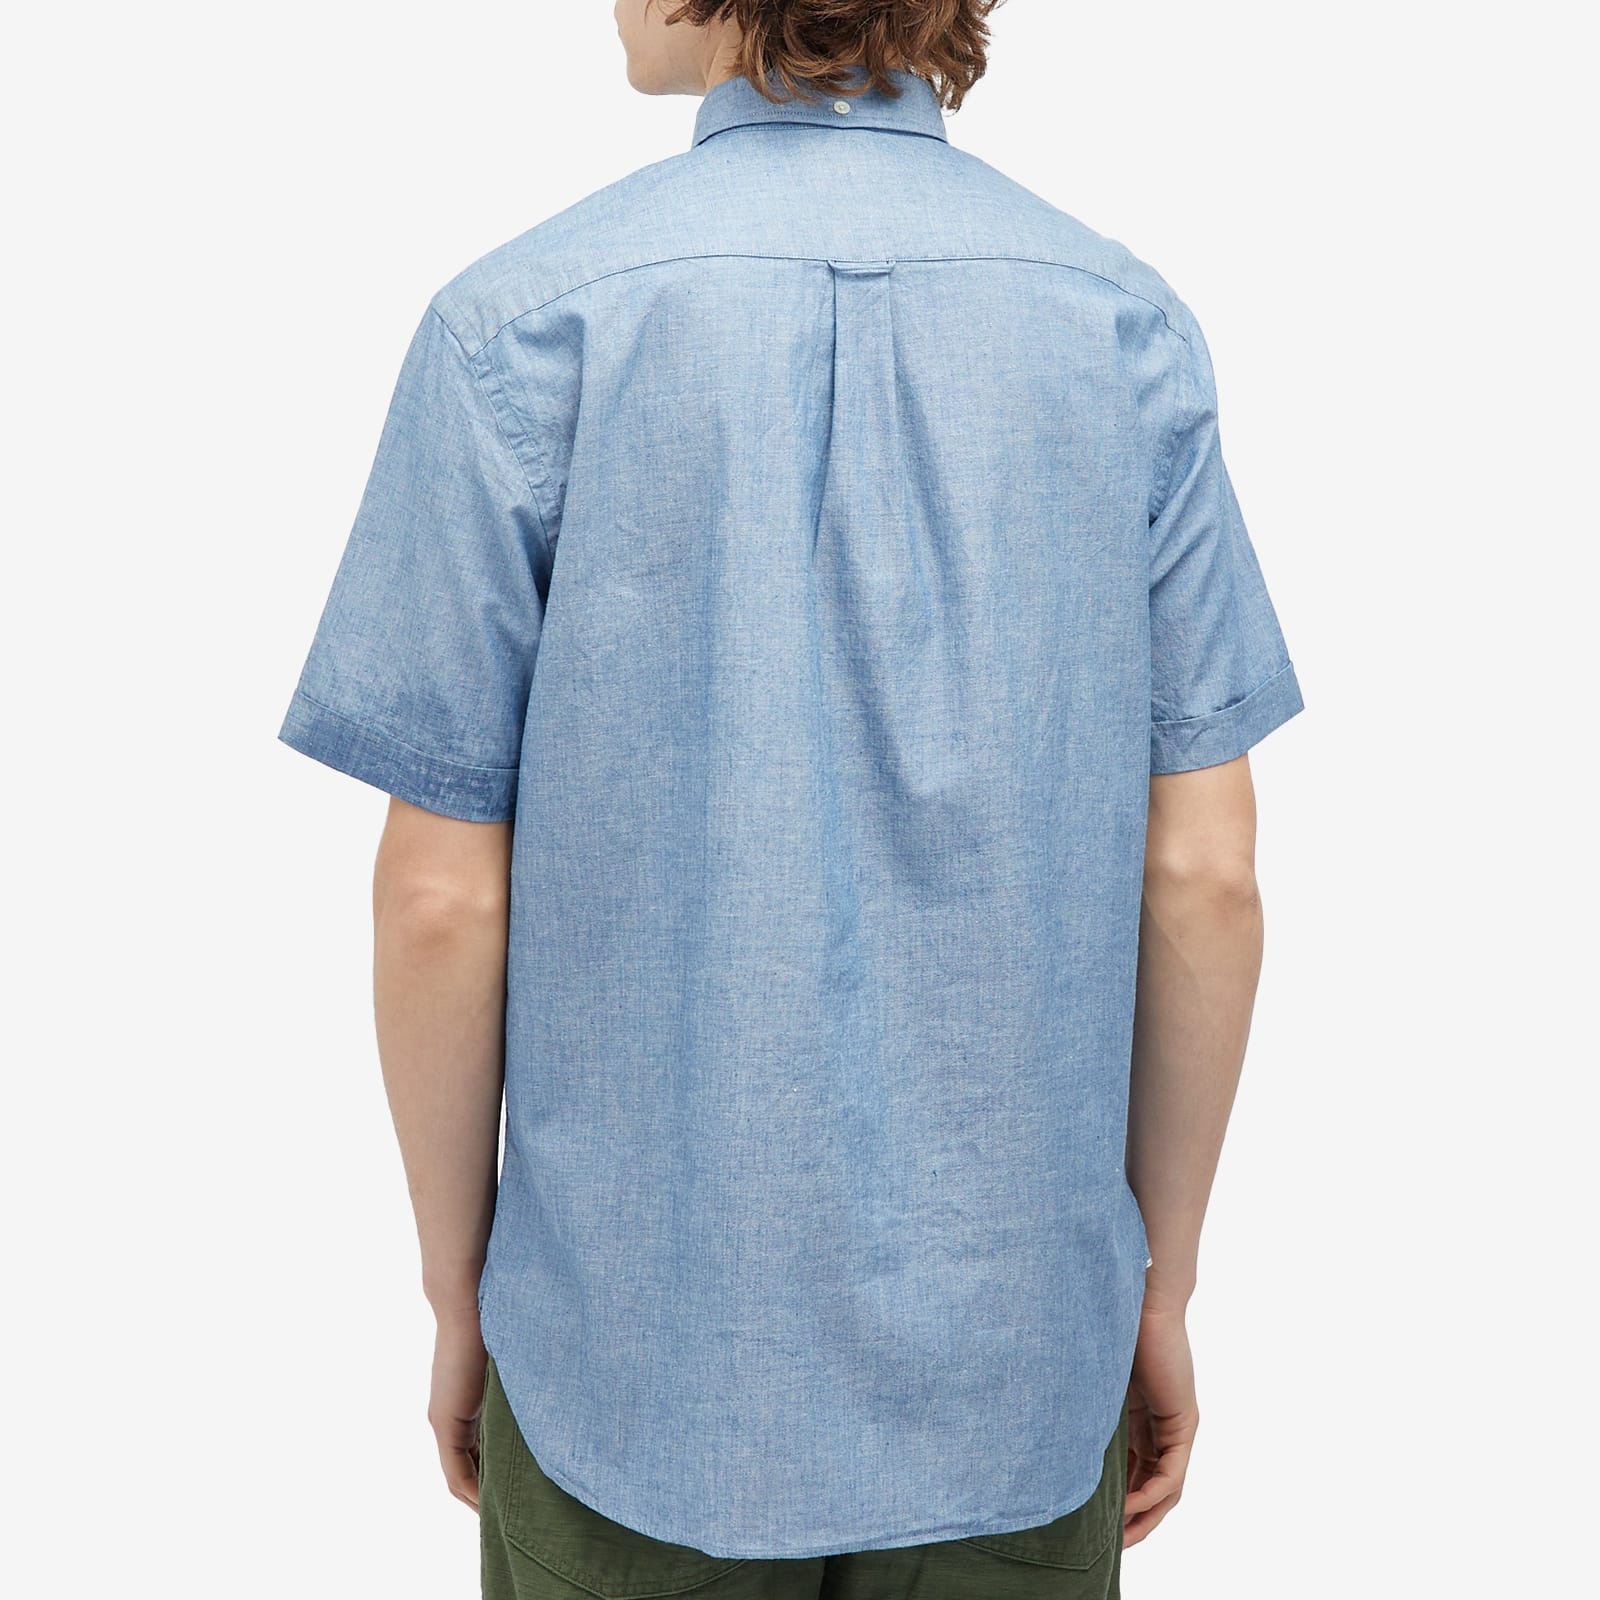 Beams Plus Button Down Popover Short Sleeve Chambray Shirt - 3